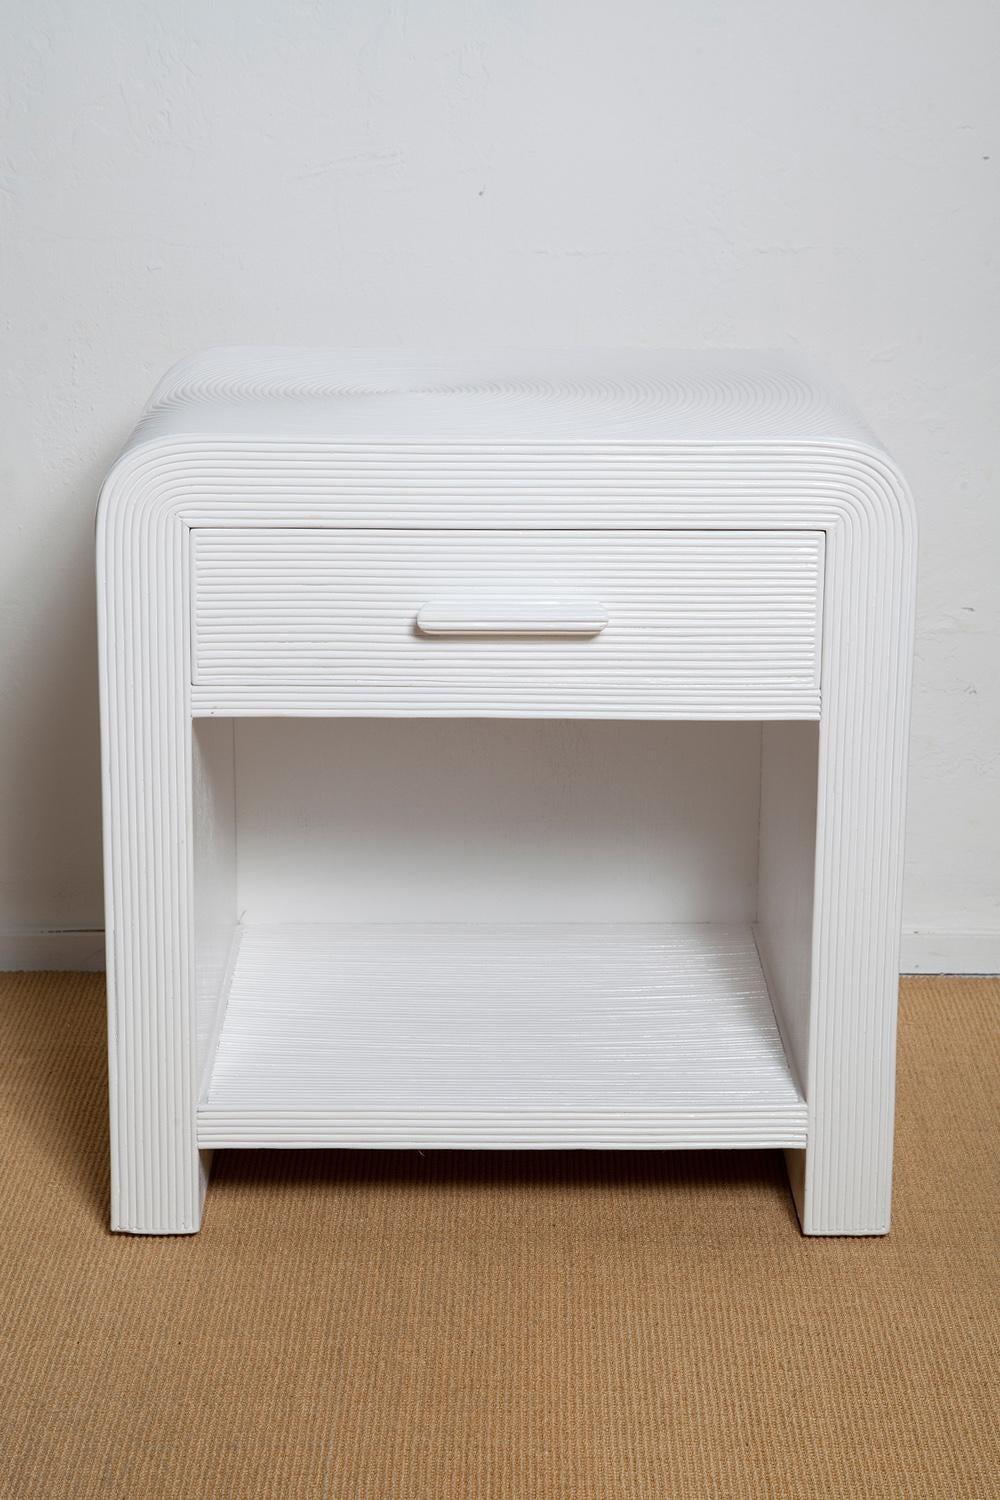 Our vintage pair of 1970s white lacquered split bamboo night stands feature a graphically interesting concentric ring pattern which makes them equal parts modern and charming!